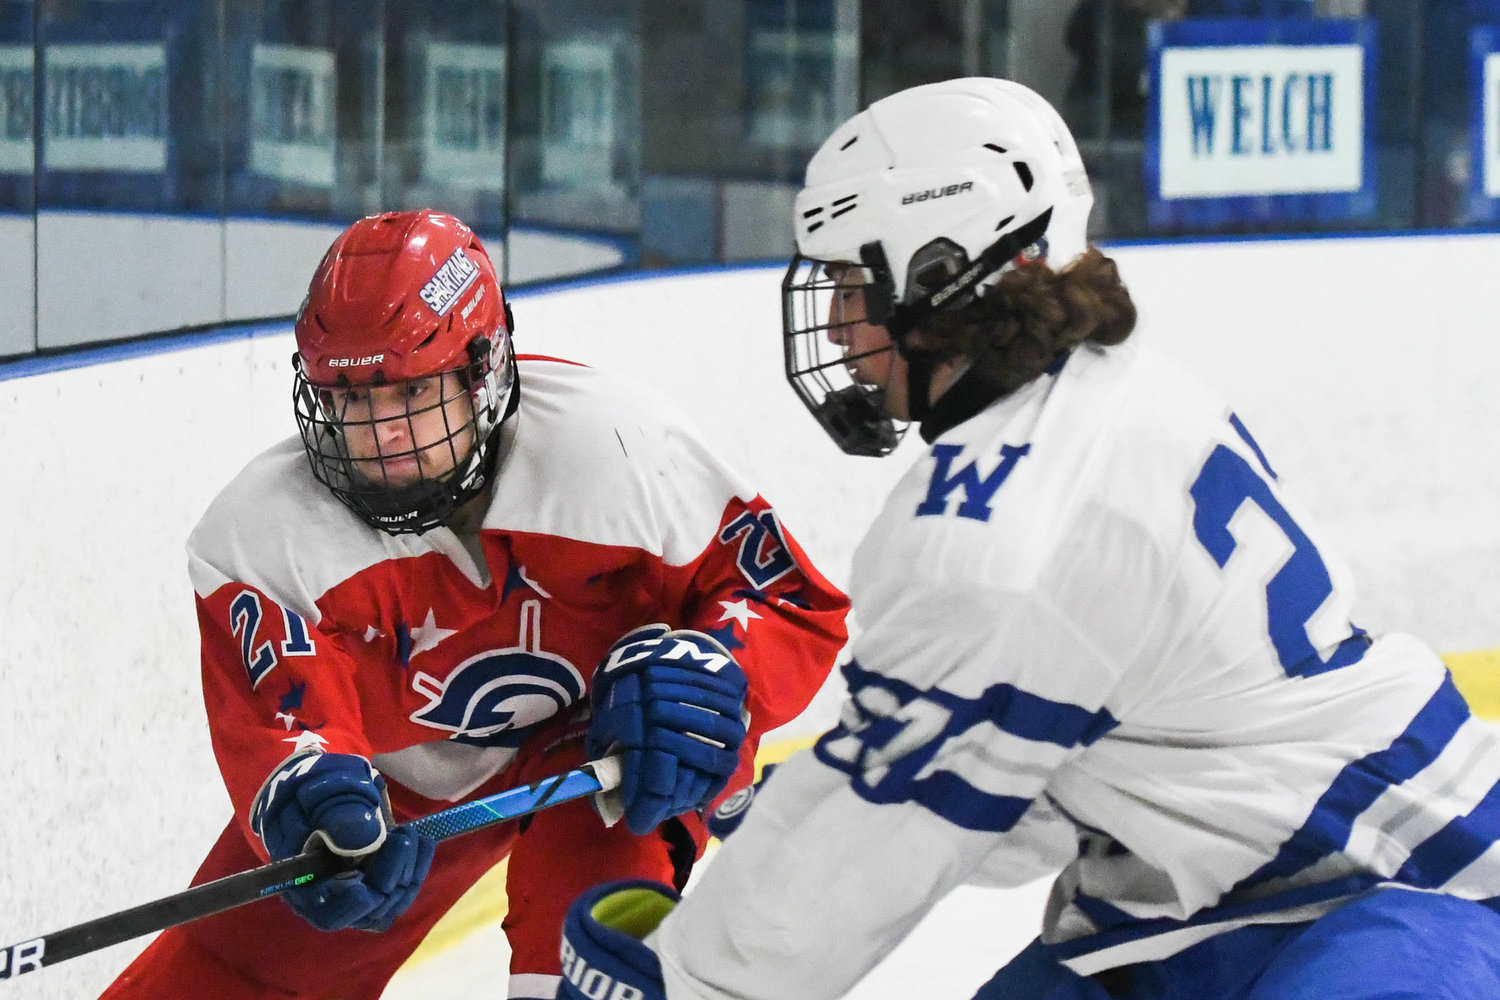 From left, New Hartford player Gabriel Syrotynski moves the puck against Whitesboro player John Welch during the game on Tuesday, Feb. 8.